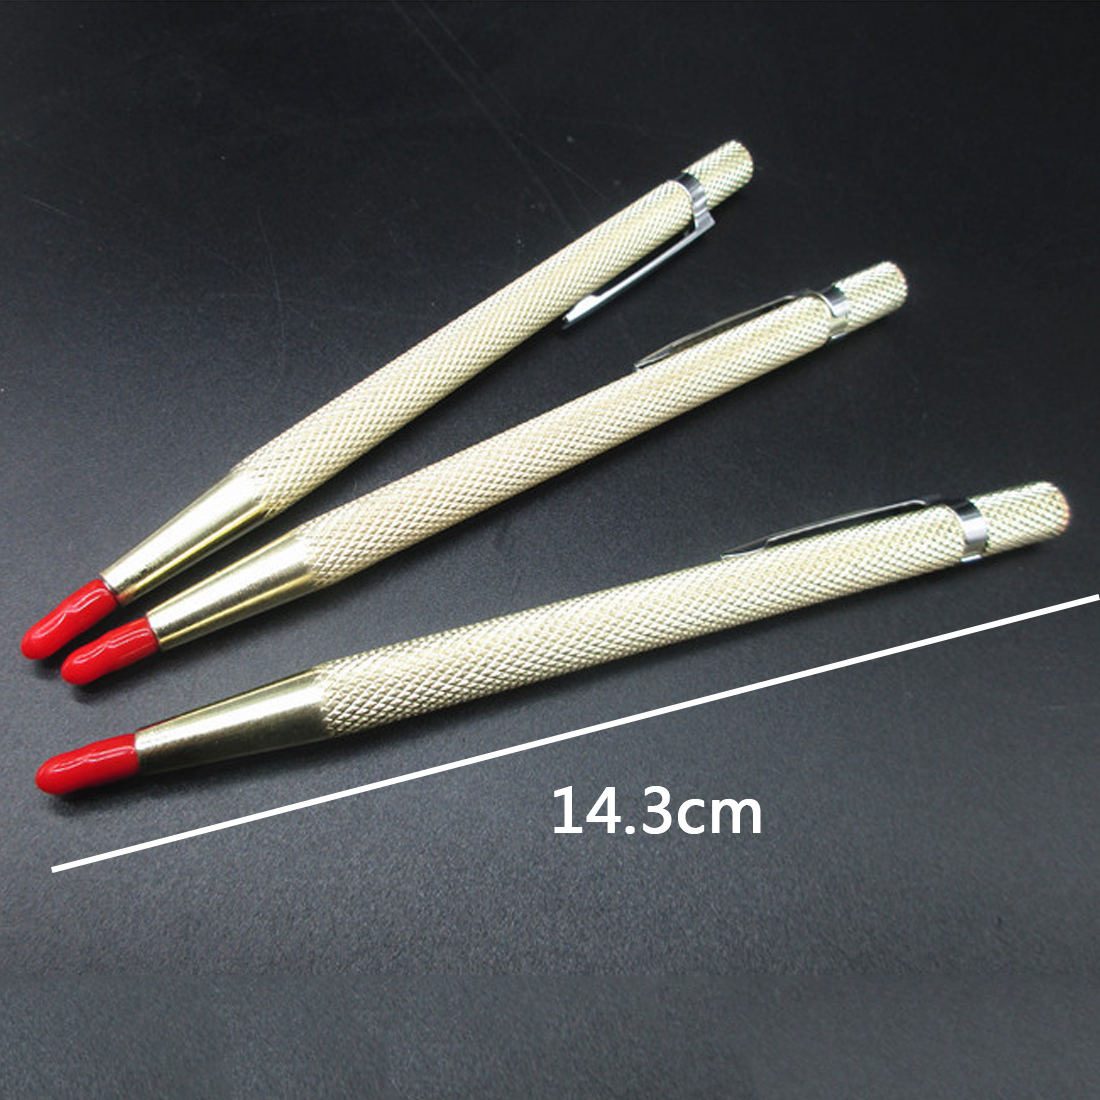 1Pc Tungsten Steel Tip Scriber Marking Etching Pen Marking Tools for Ceramics Glass Shell Metal Scribe Lettering Hand Tools